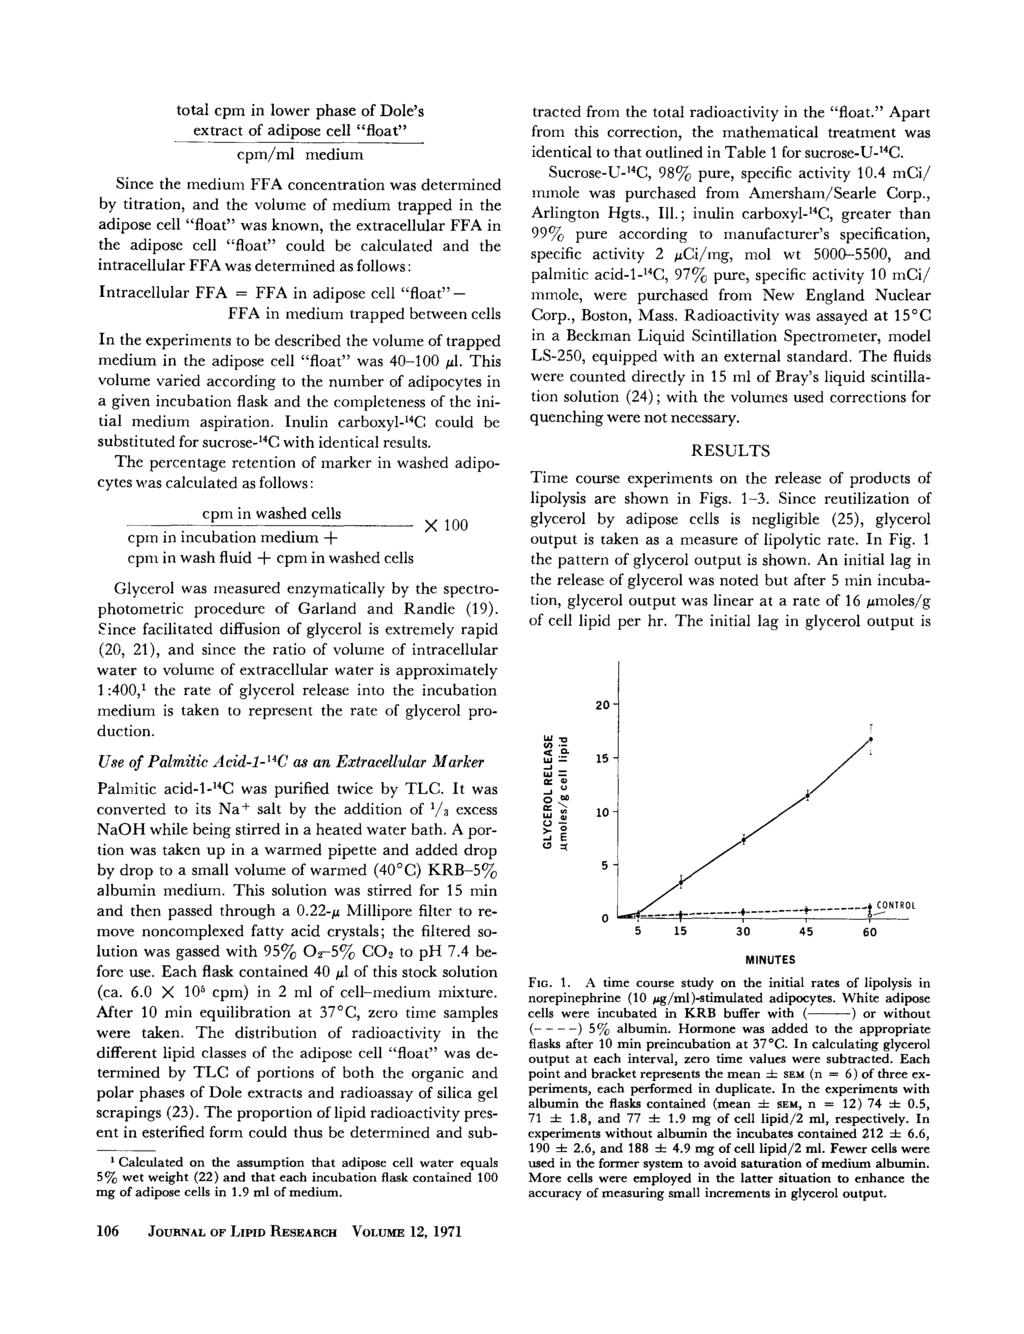 total cpm in lower phase of Dole s extract of adipose cell float cpm/ml medium Since the medium FFA concentration was determined by titration, and the volume of medium trapped in the adipose cell